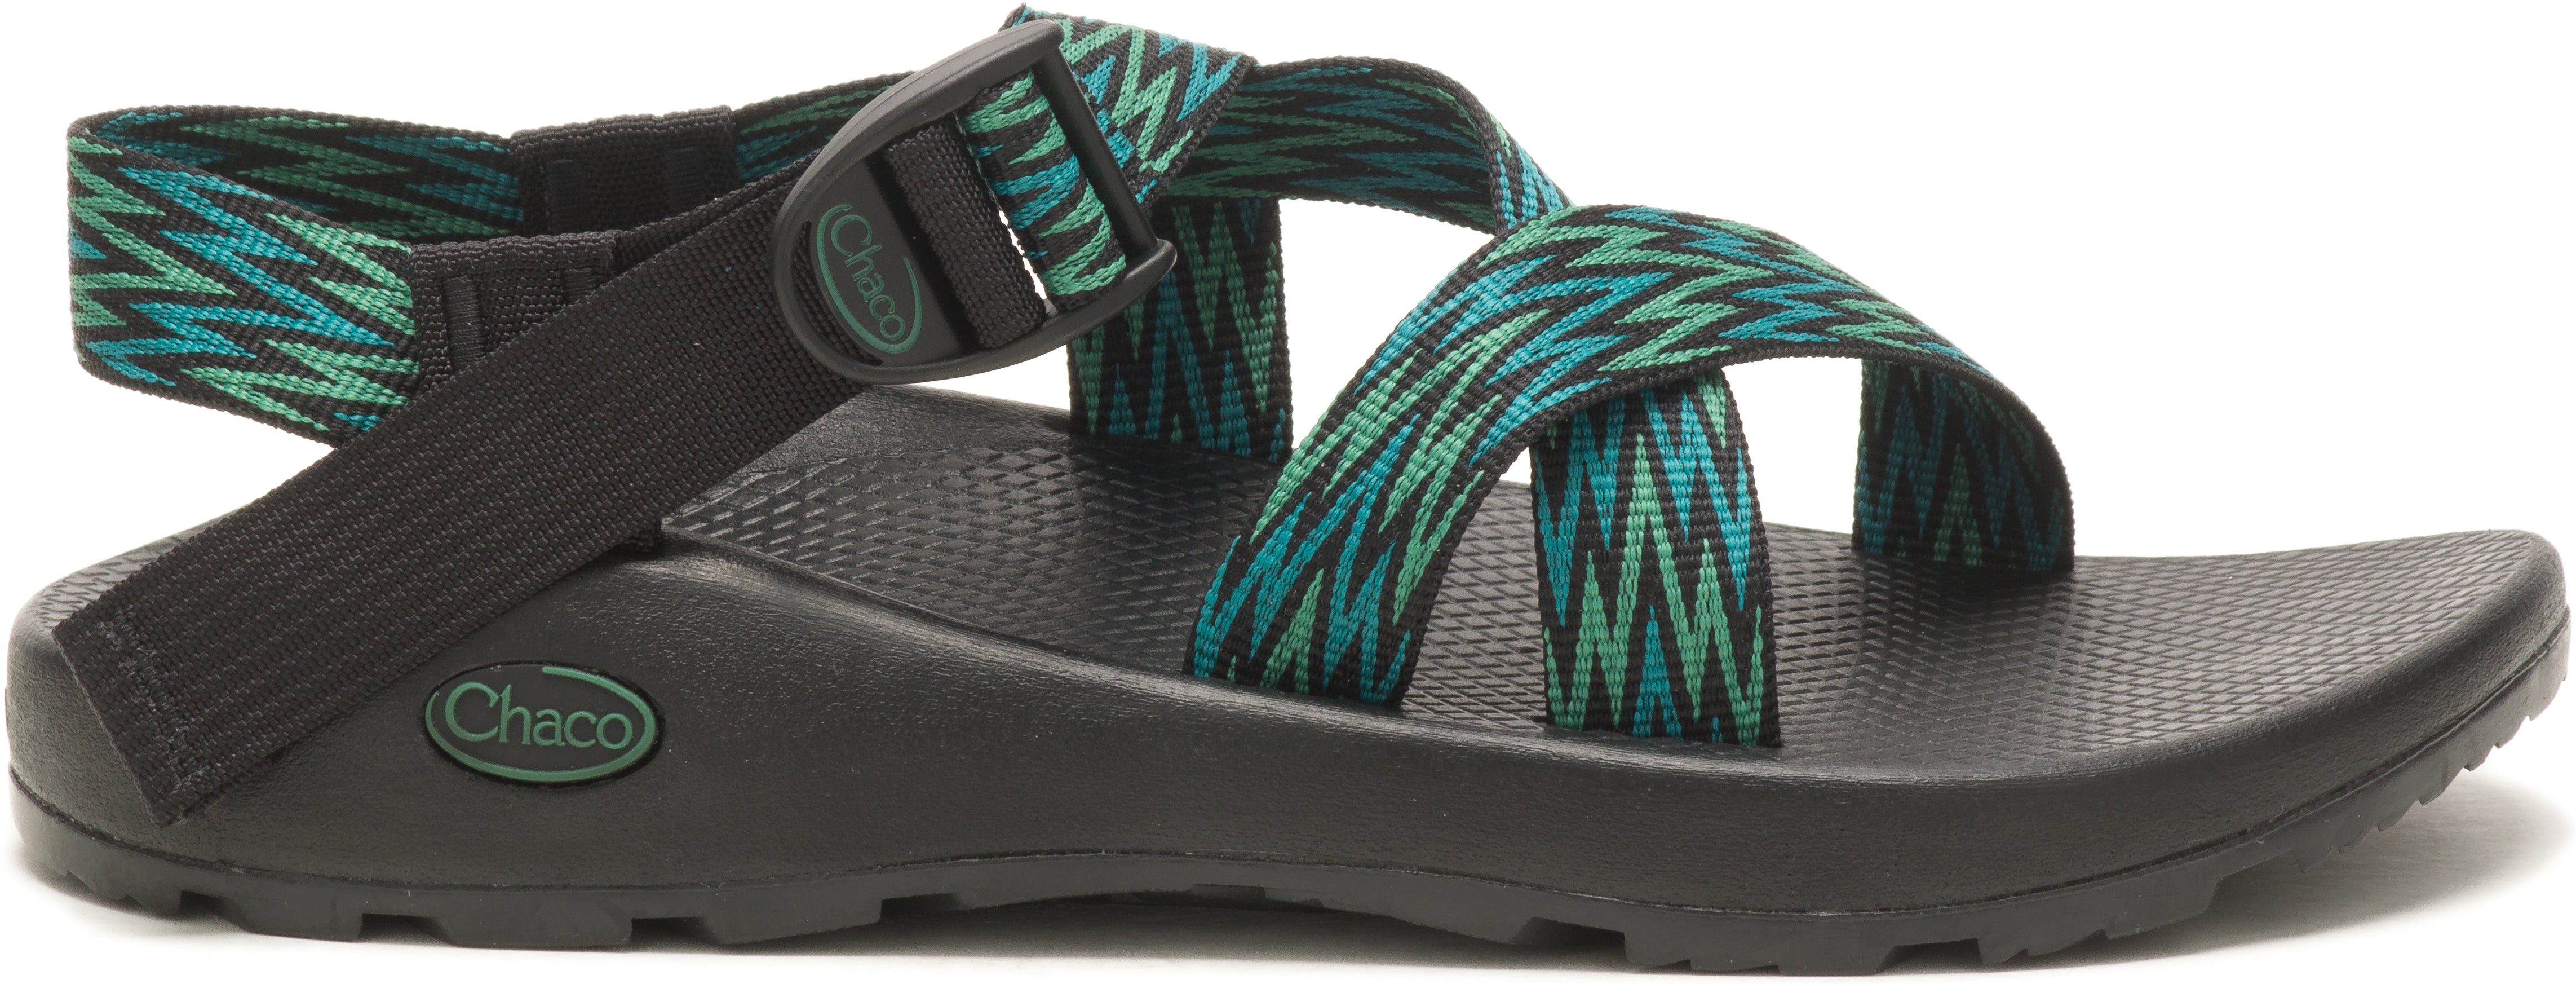 Chaco Z/1 Classic Sandals - Wide - Women's